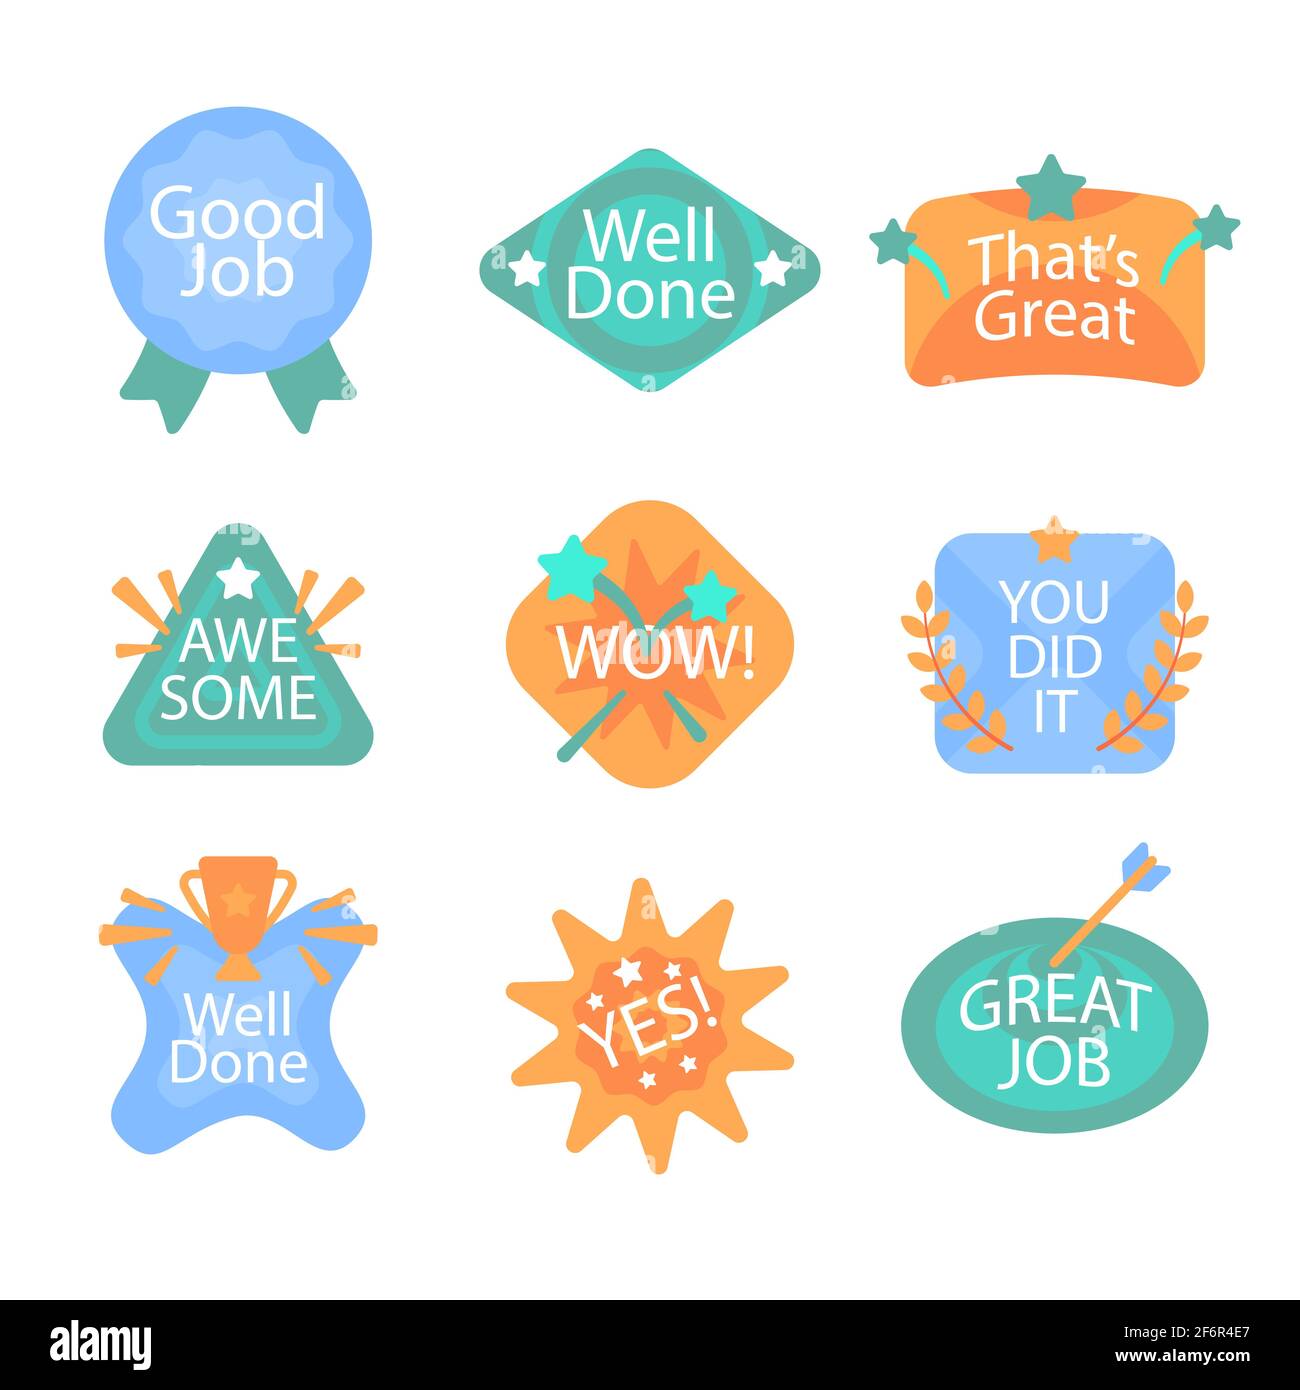 2,091 Well Done Stickers Images, Stock Photos, 3D objects, & Vectors